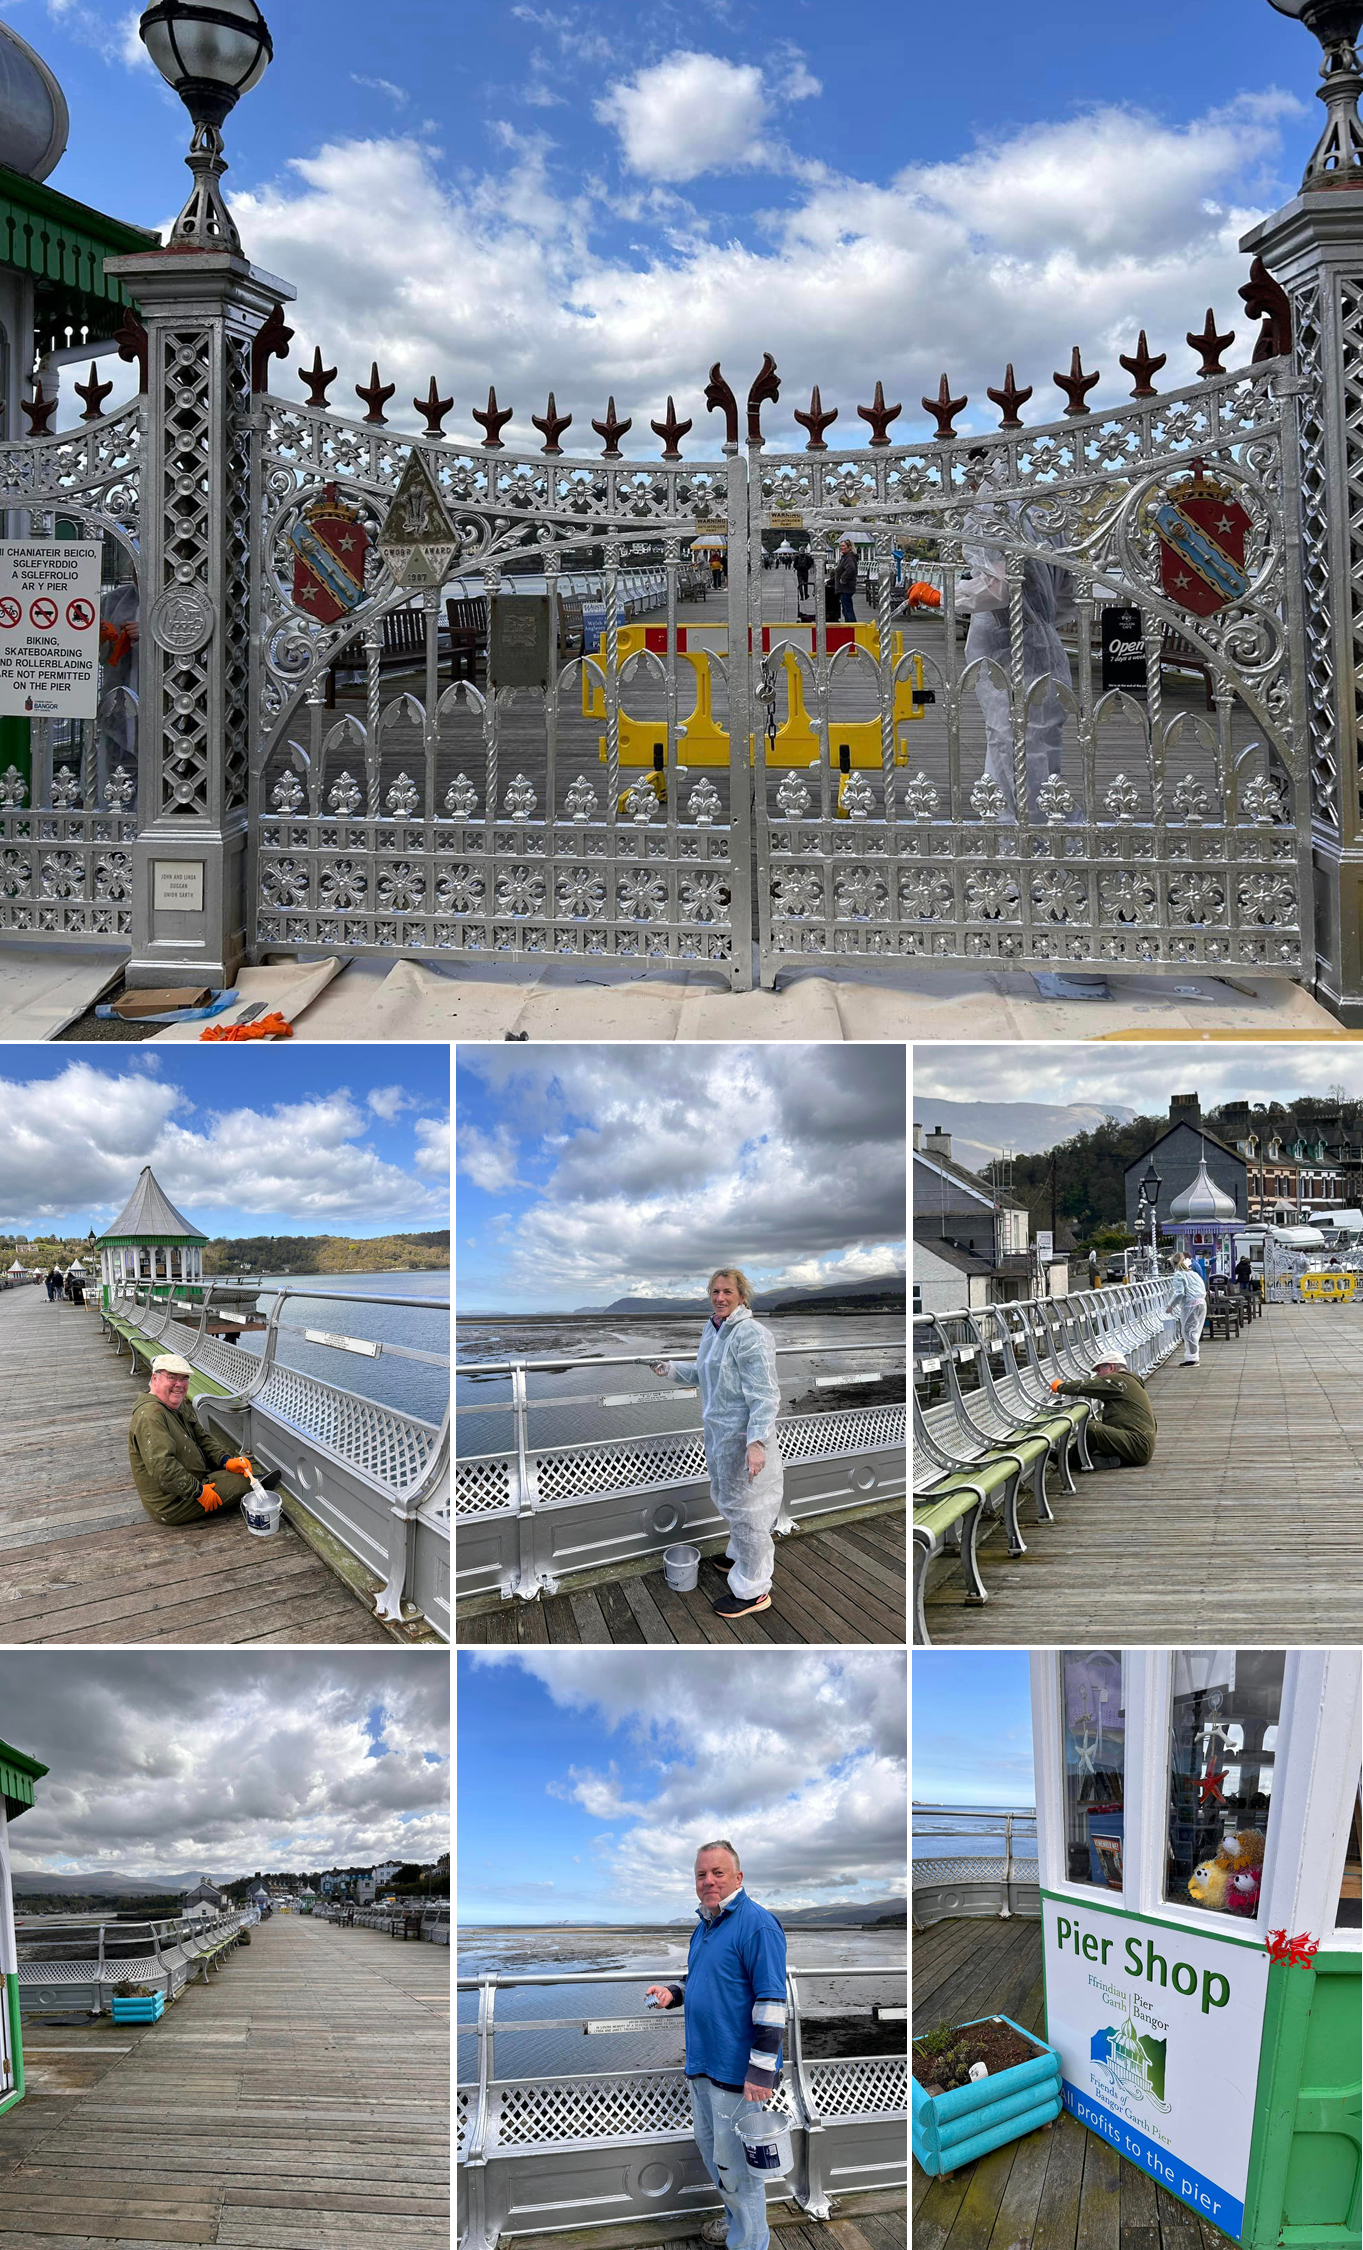 Thank you to all the volunteers for their excellent work and efforts painting the Pier.